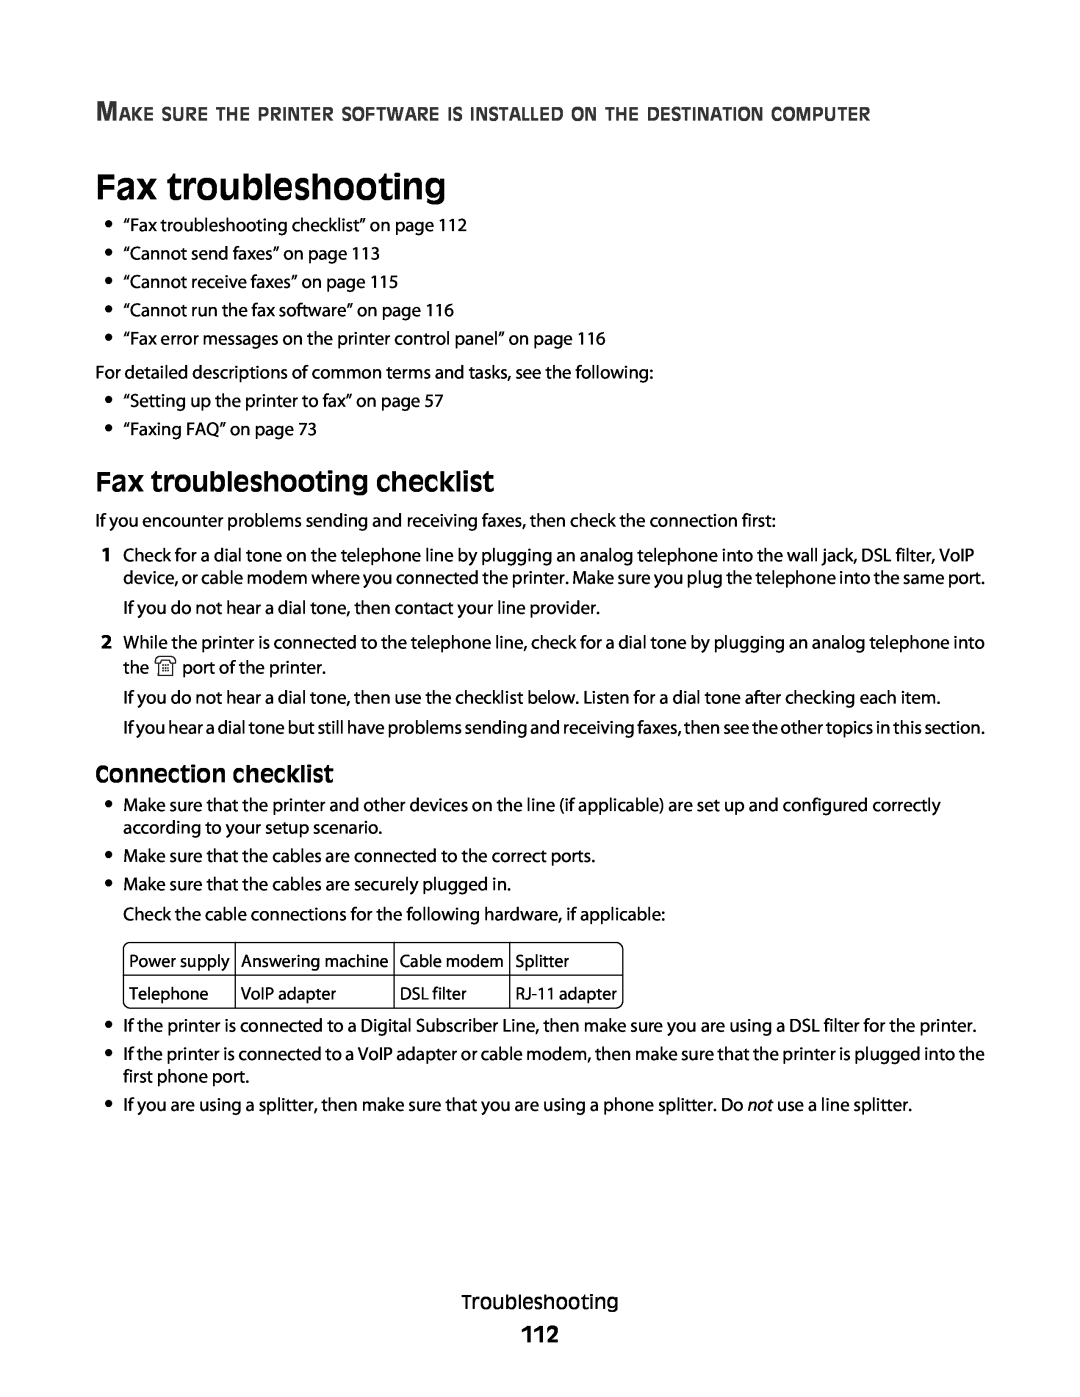 Dell V515W manual Fax troubleshooting checklist, Connection checklist 